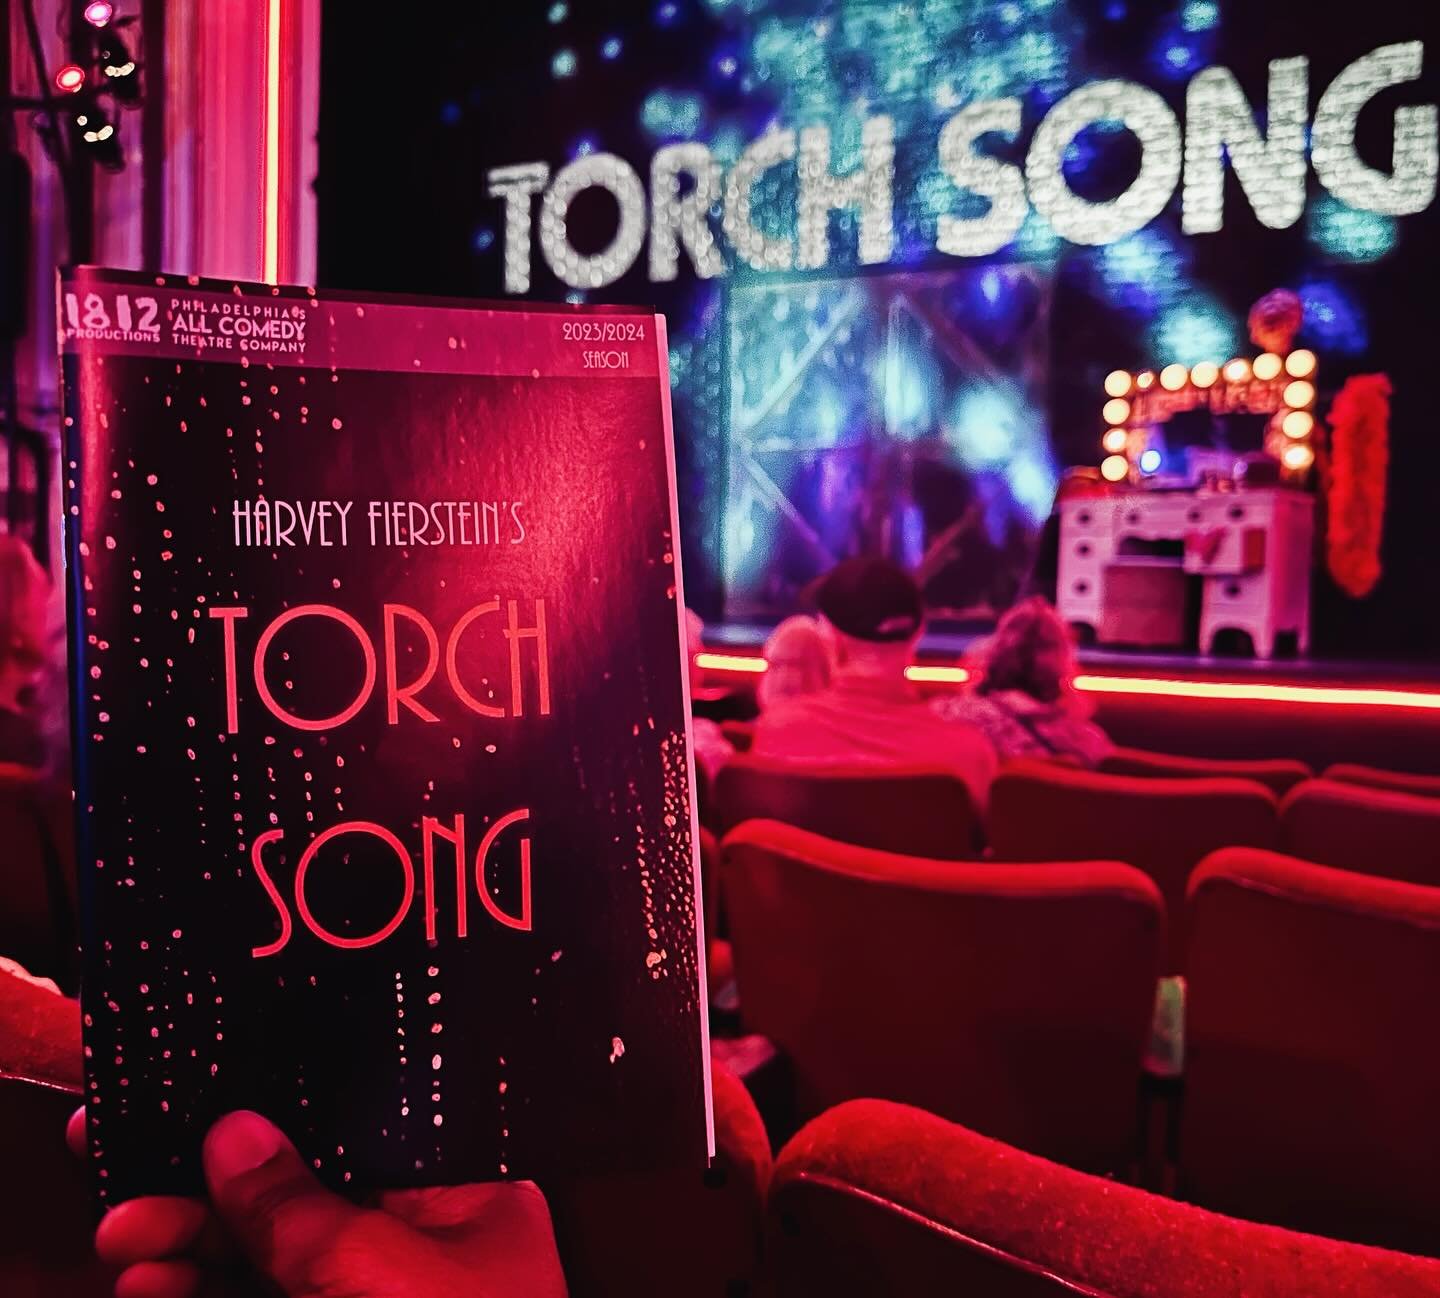 Tonight&rsquo;s Experience&hellip;#TorchSong @1812_productions through May 19th. #showup4phillytheatre #phillyhasthebestdatenights 🪩 🏳️&zwj;🌈🎭❤️